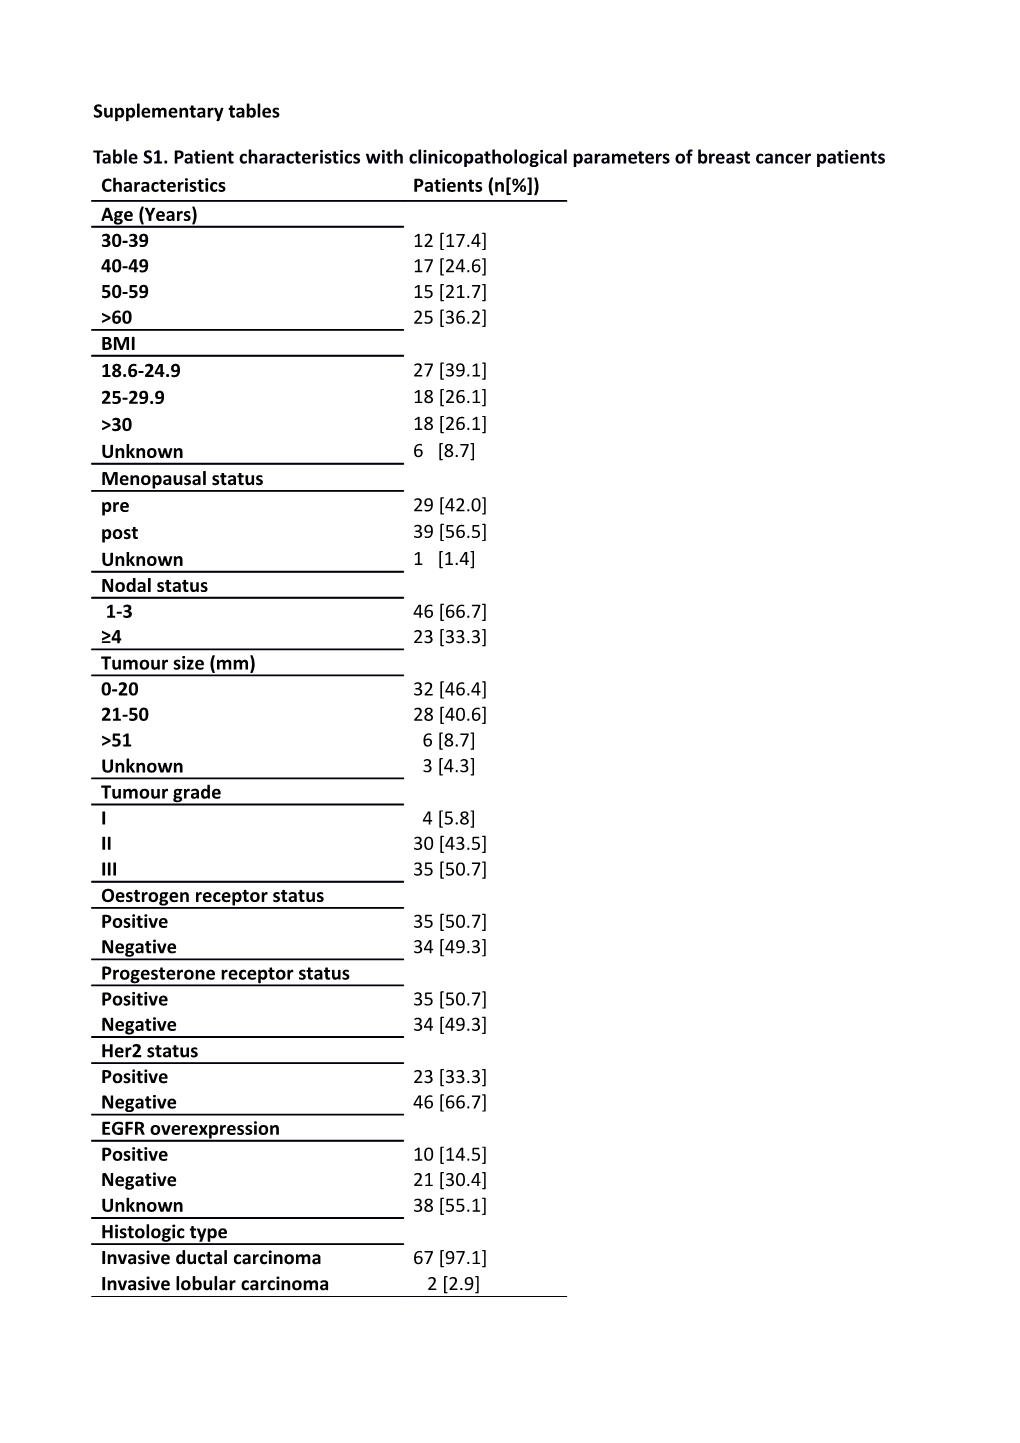 Table S1. Patient Characteristics with Clinicopathological Parameters of Breast Cancer Patients